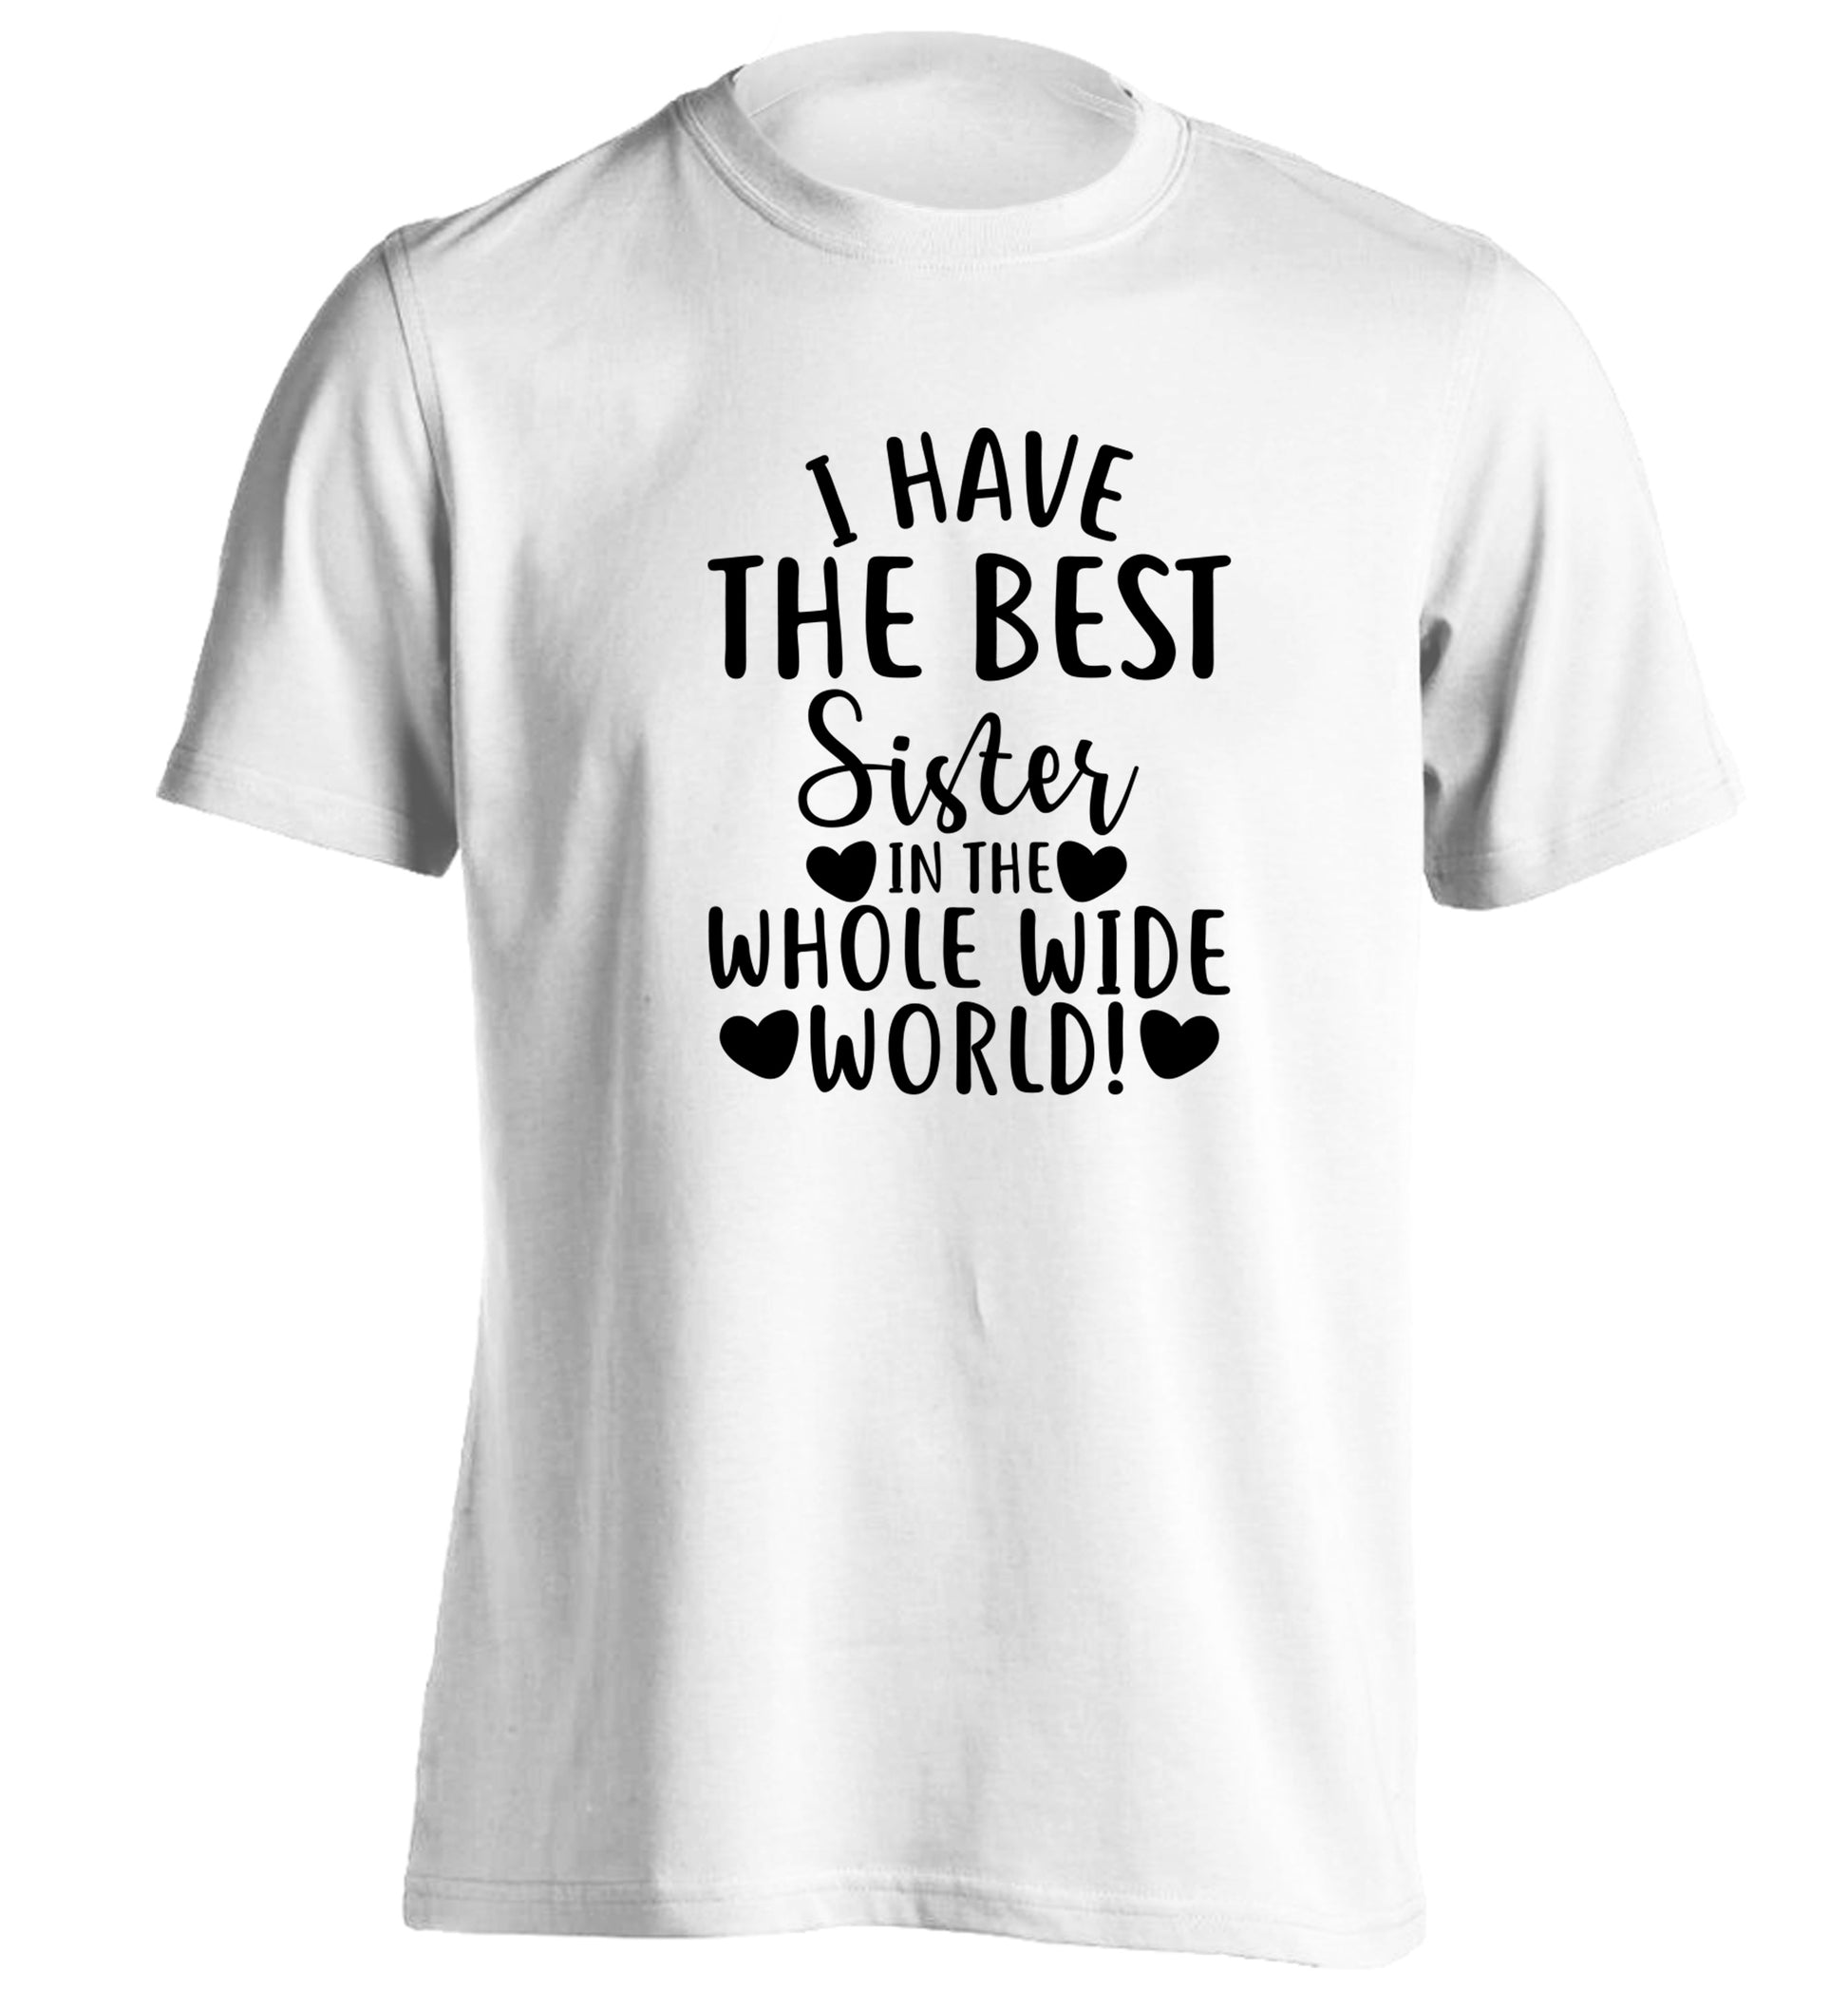 I have the best sister in the whole wide world! adults unisex white Tshirt 2XL